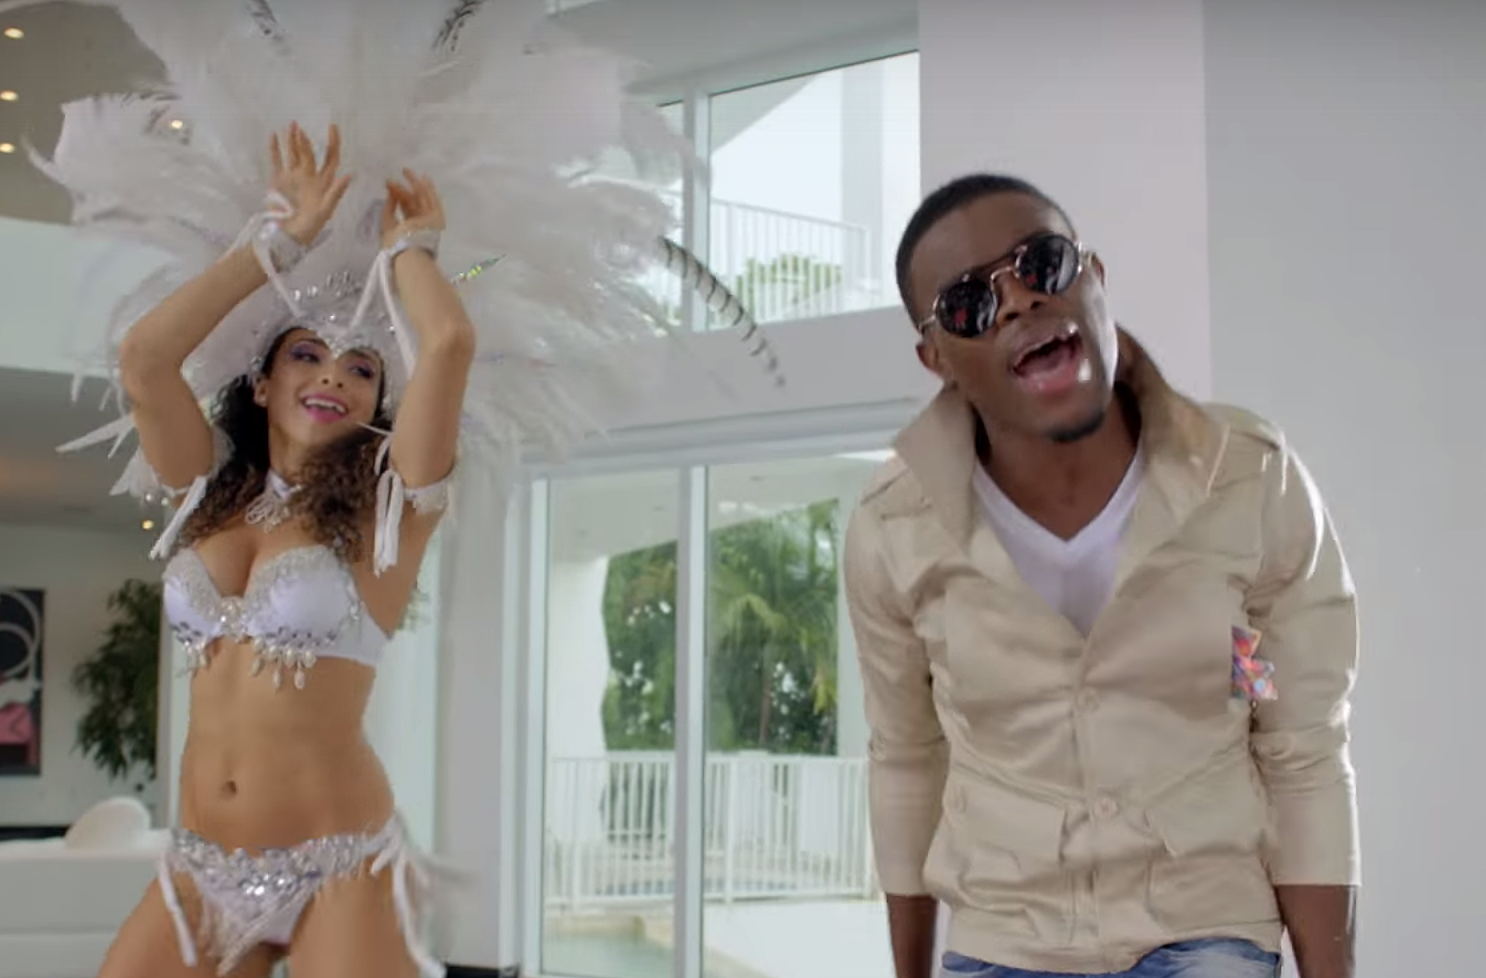 OMI's 'Hula Hoop' Video Busts Out the Carnival Costumes